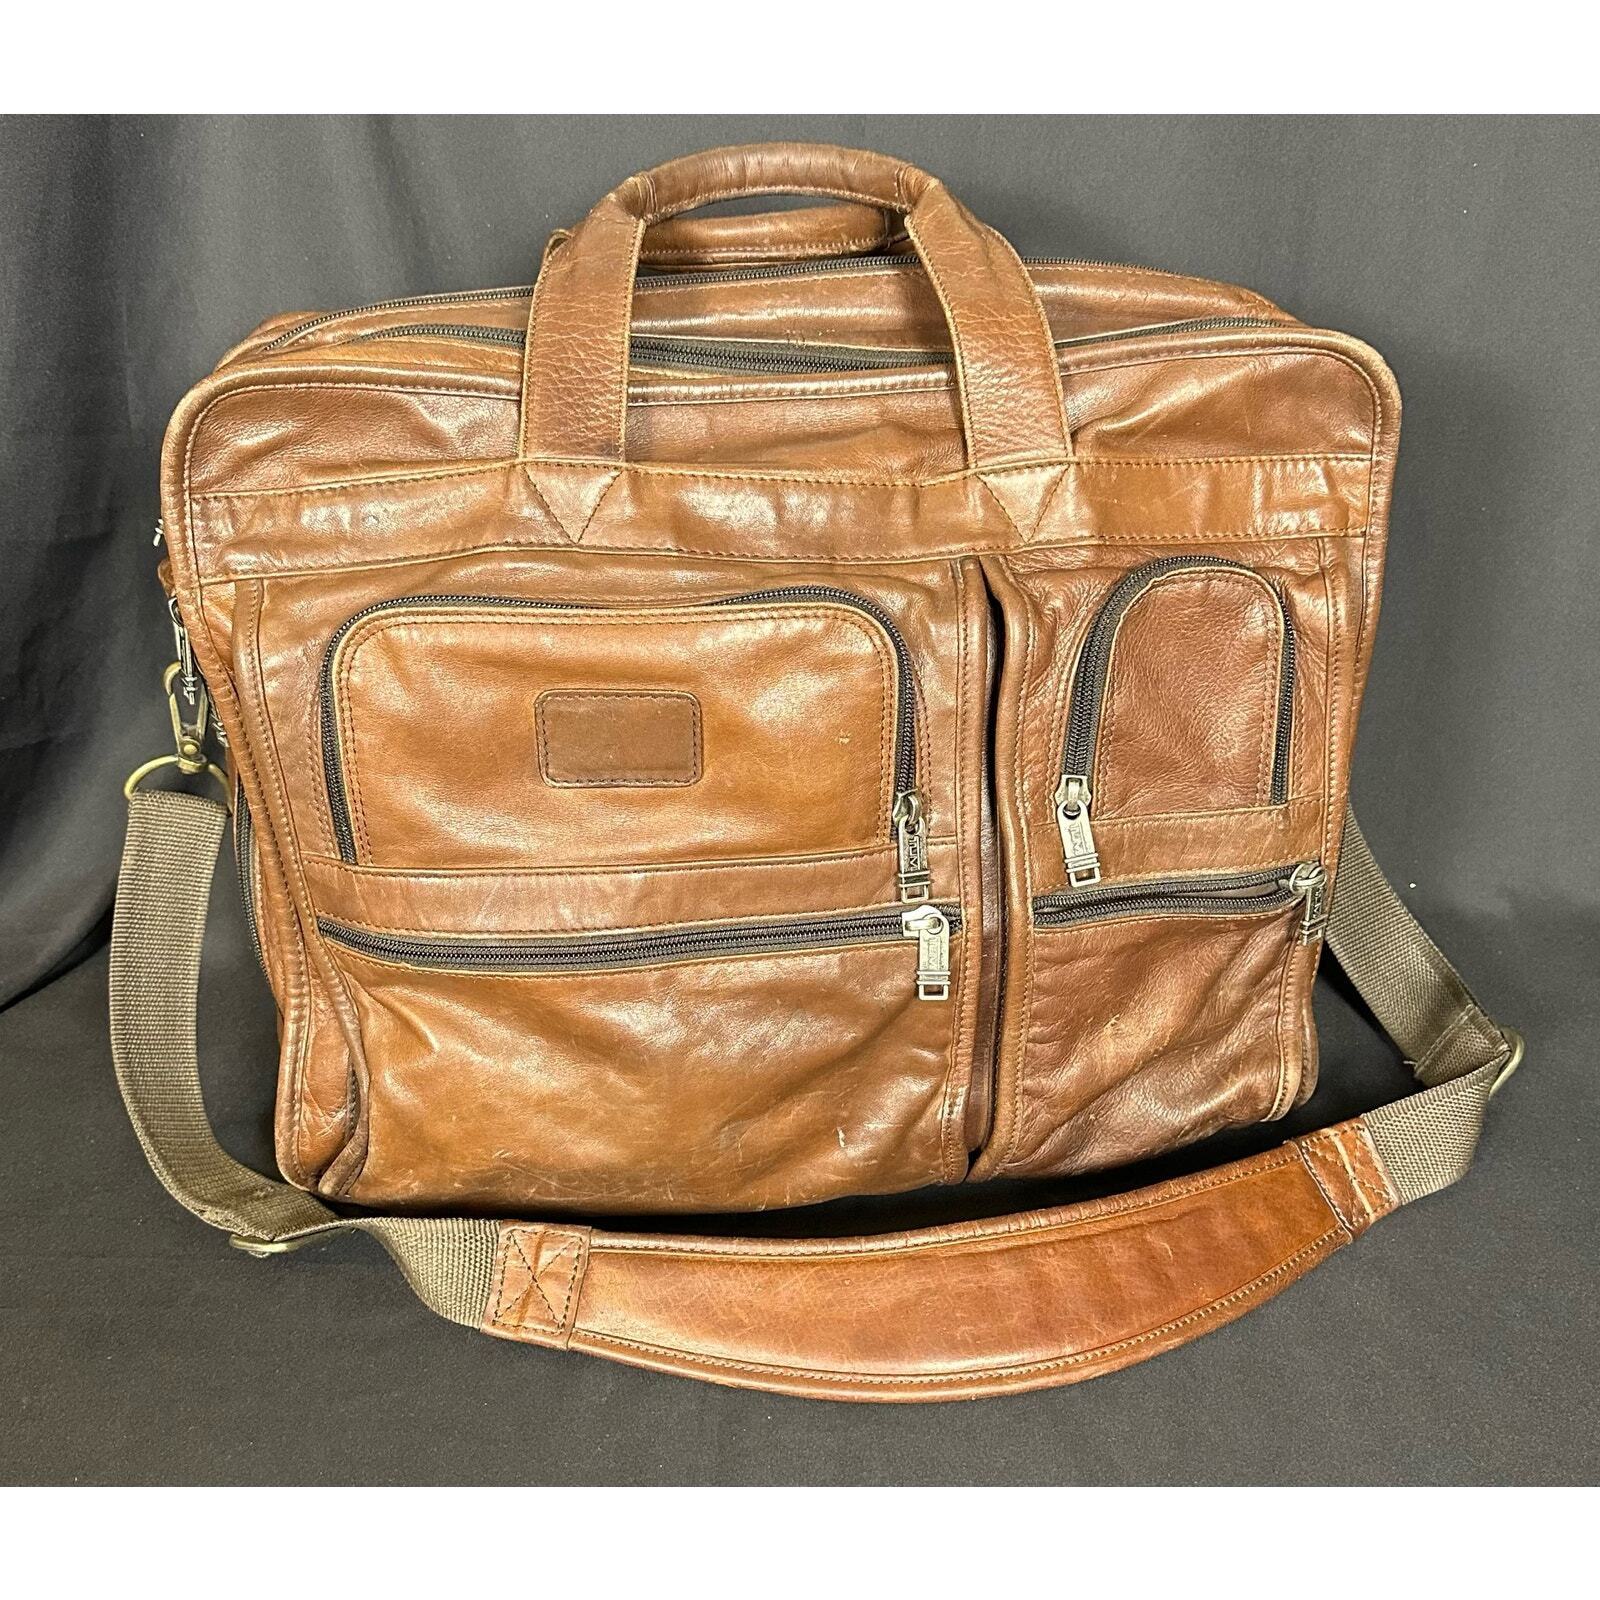 TUMI Vintage Alpha Leather Expandable Briefcase Laptop Bag Very Nice-VERY RARE